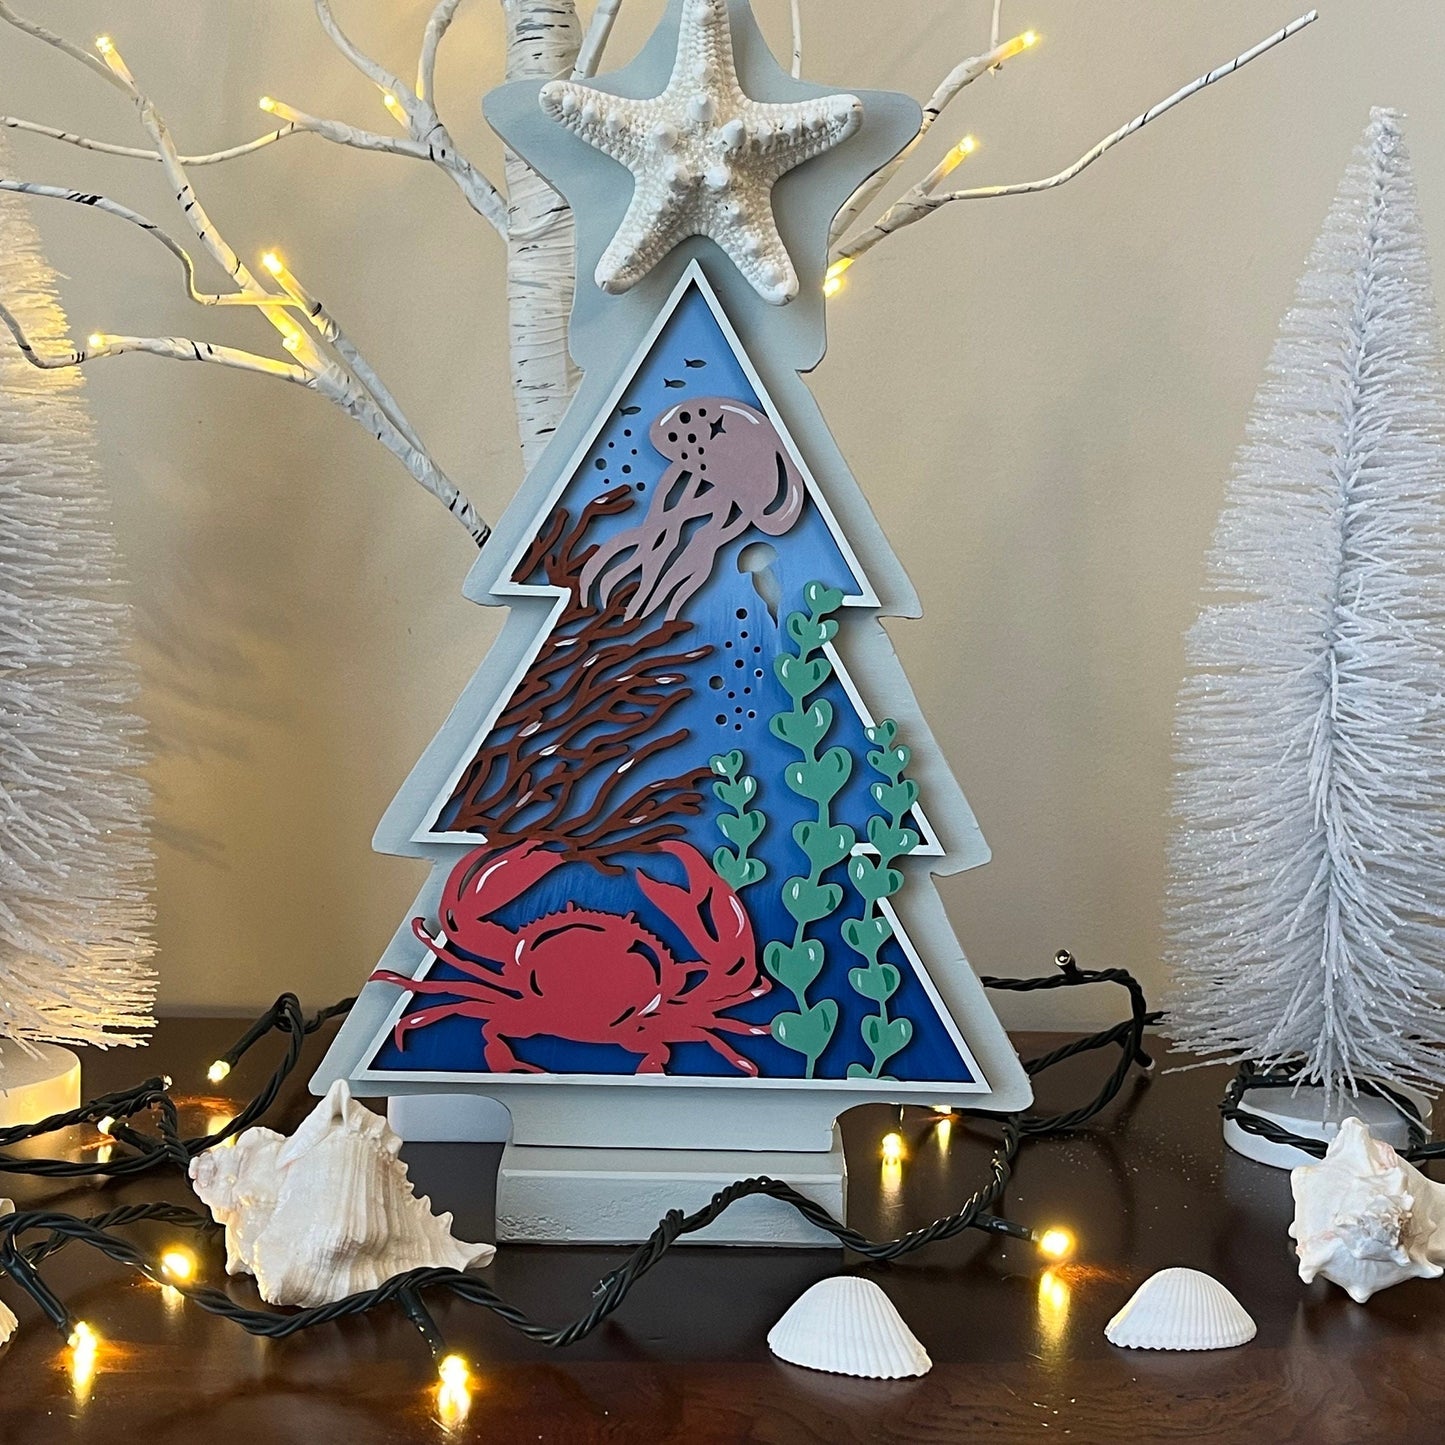 12 inch wooden tree standing table decor with an under the sea hand painted scene in the middle and a genuine starfish on top.